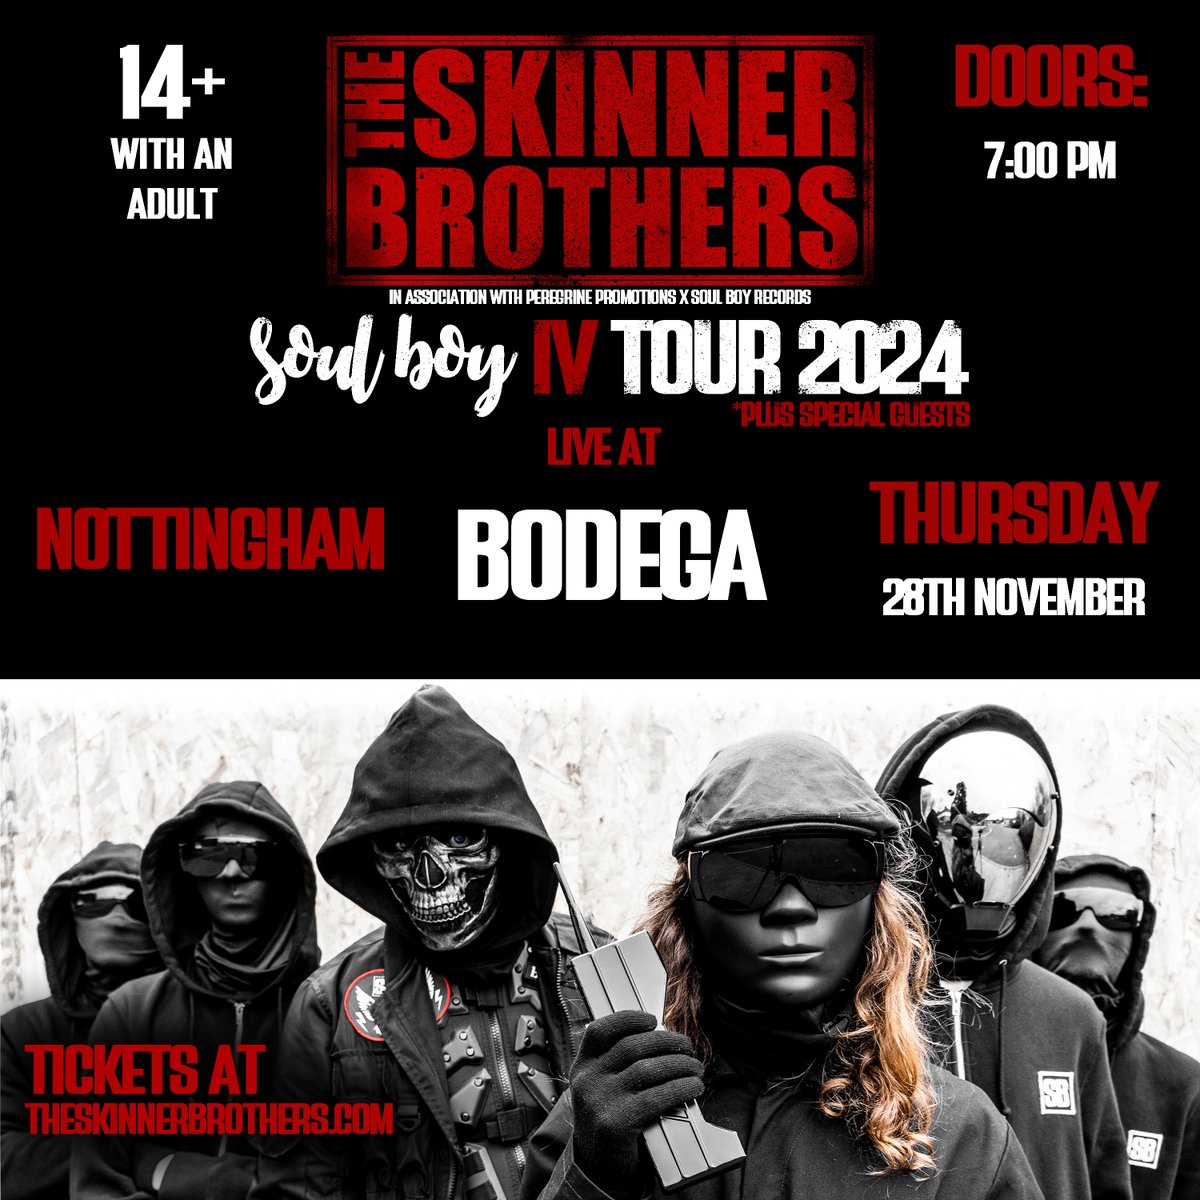 GIG NEWS London lads @TheSkinnerBros are hitting the road in support of their upcoming album 'Soul Boy 4' and they've decided to make a stop at our place! Tickets on sale Friday 12th April 👉 alt.tkts.me/tl/yf5t